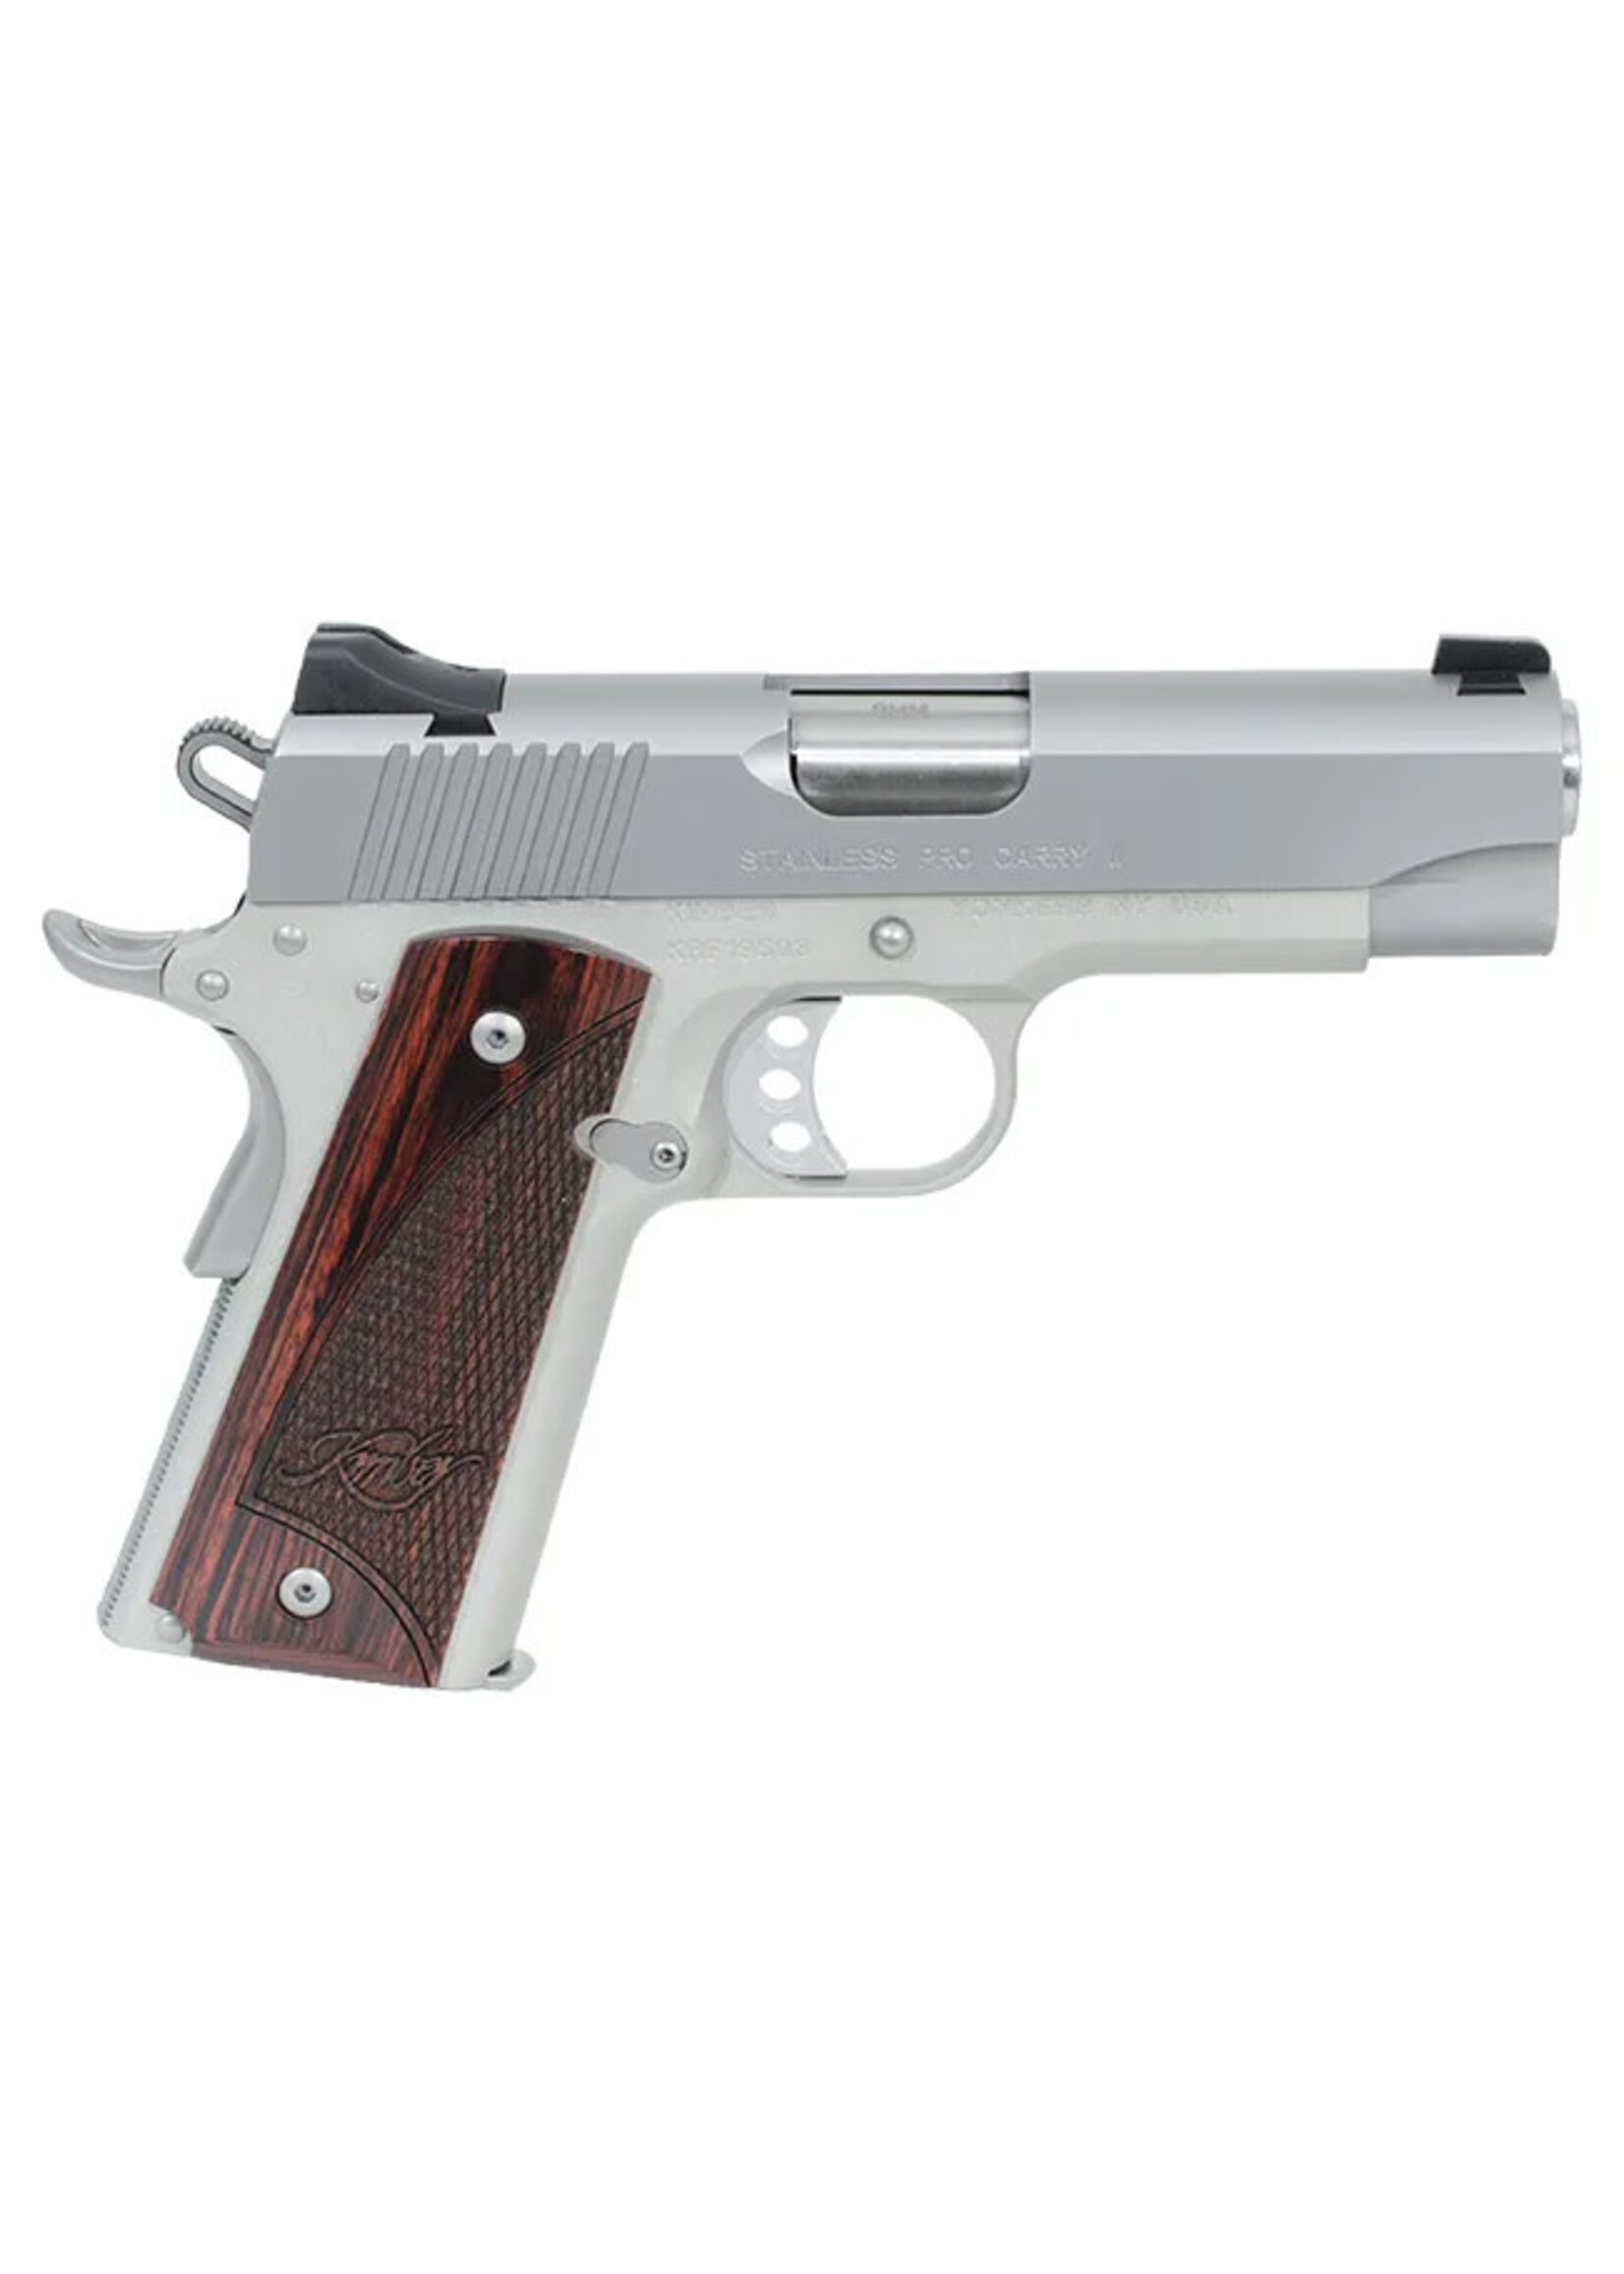 Kimber Kimber, STAINLESS PRO CARRY II, Semi-automatic, Full Size, 9MM, 4" Barrel, Matte Finish, Silver, Wood Grips, Fiber Optic Front Sight, 9 Rounds 3200323